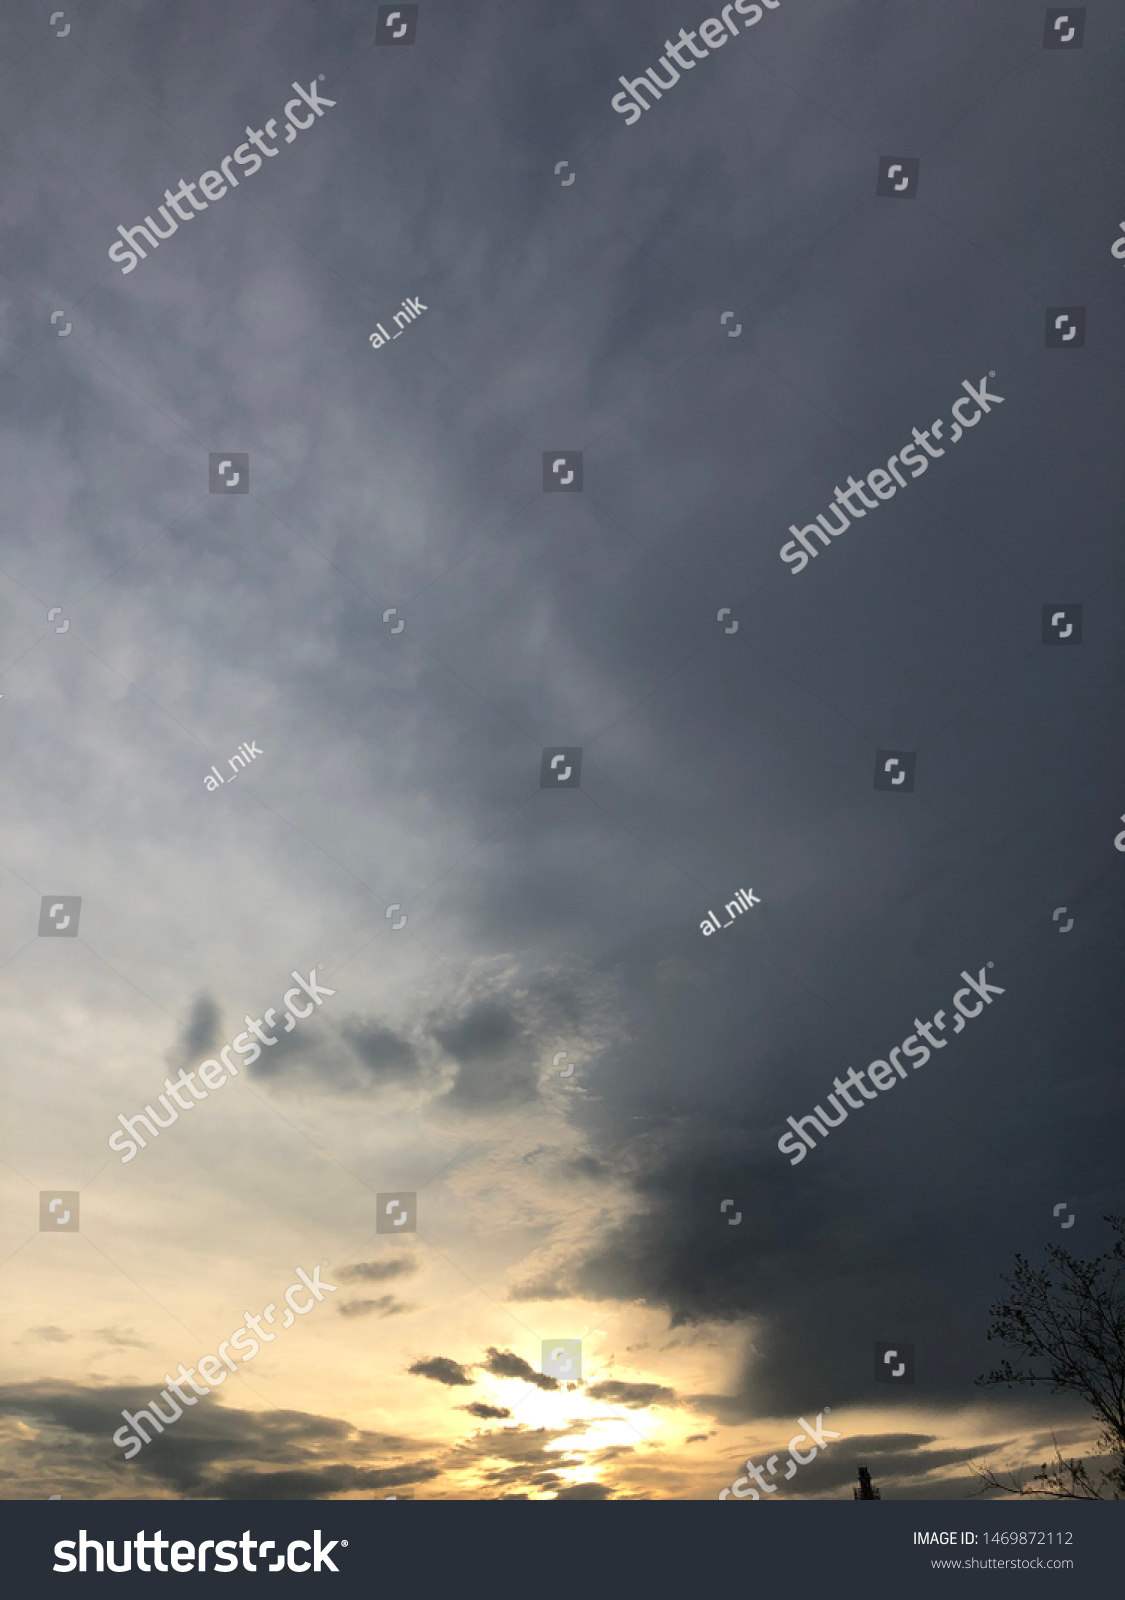 Dense clouds in twilight sky in evening.Image of cloud sky on evening time.Evening sky scene with golden light from the setting sun. Tree silhouette on a cloudy evening sky #1469872112